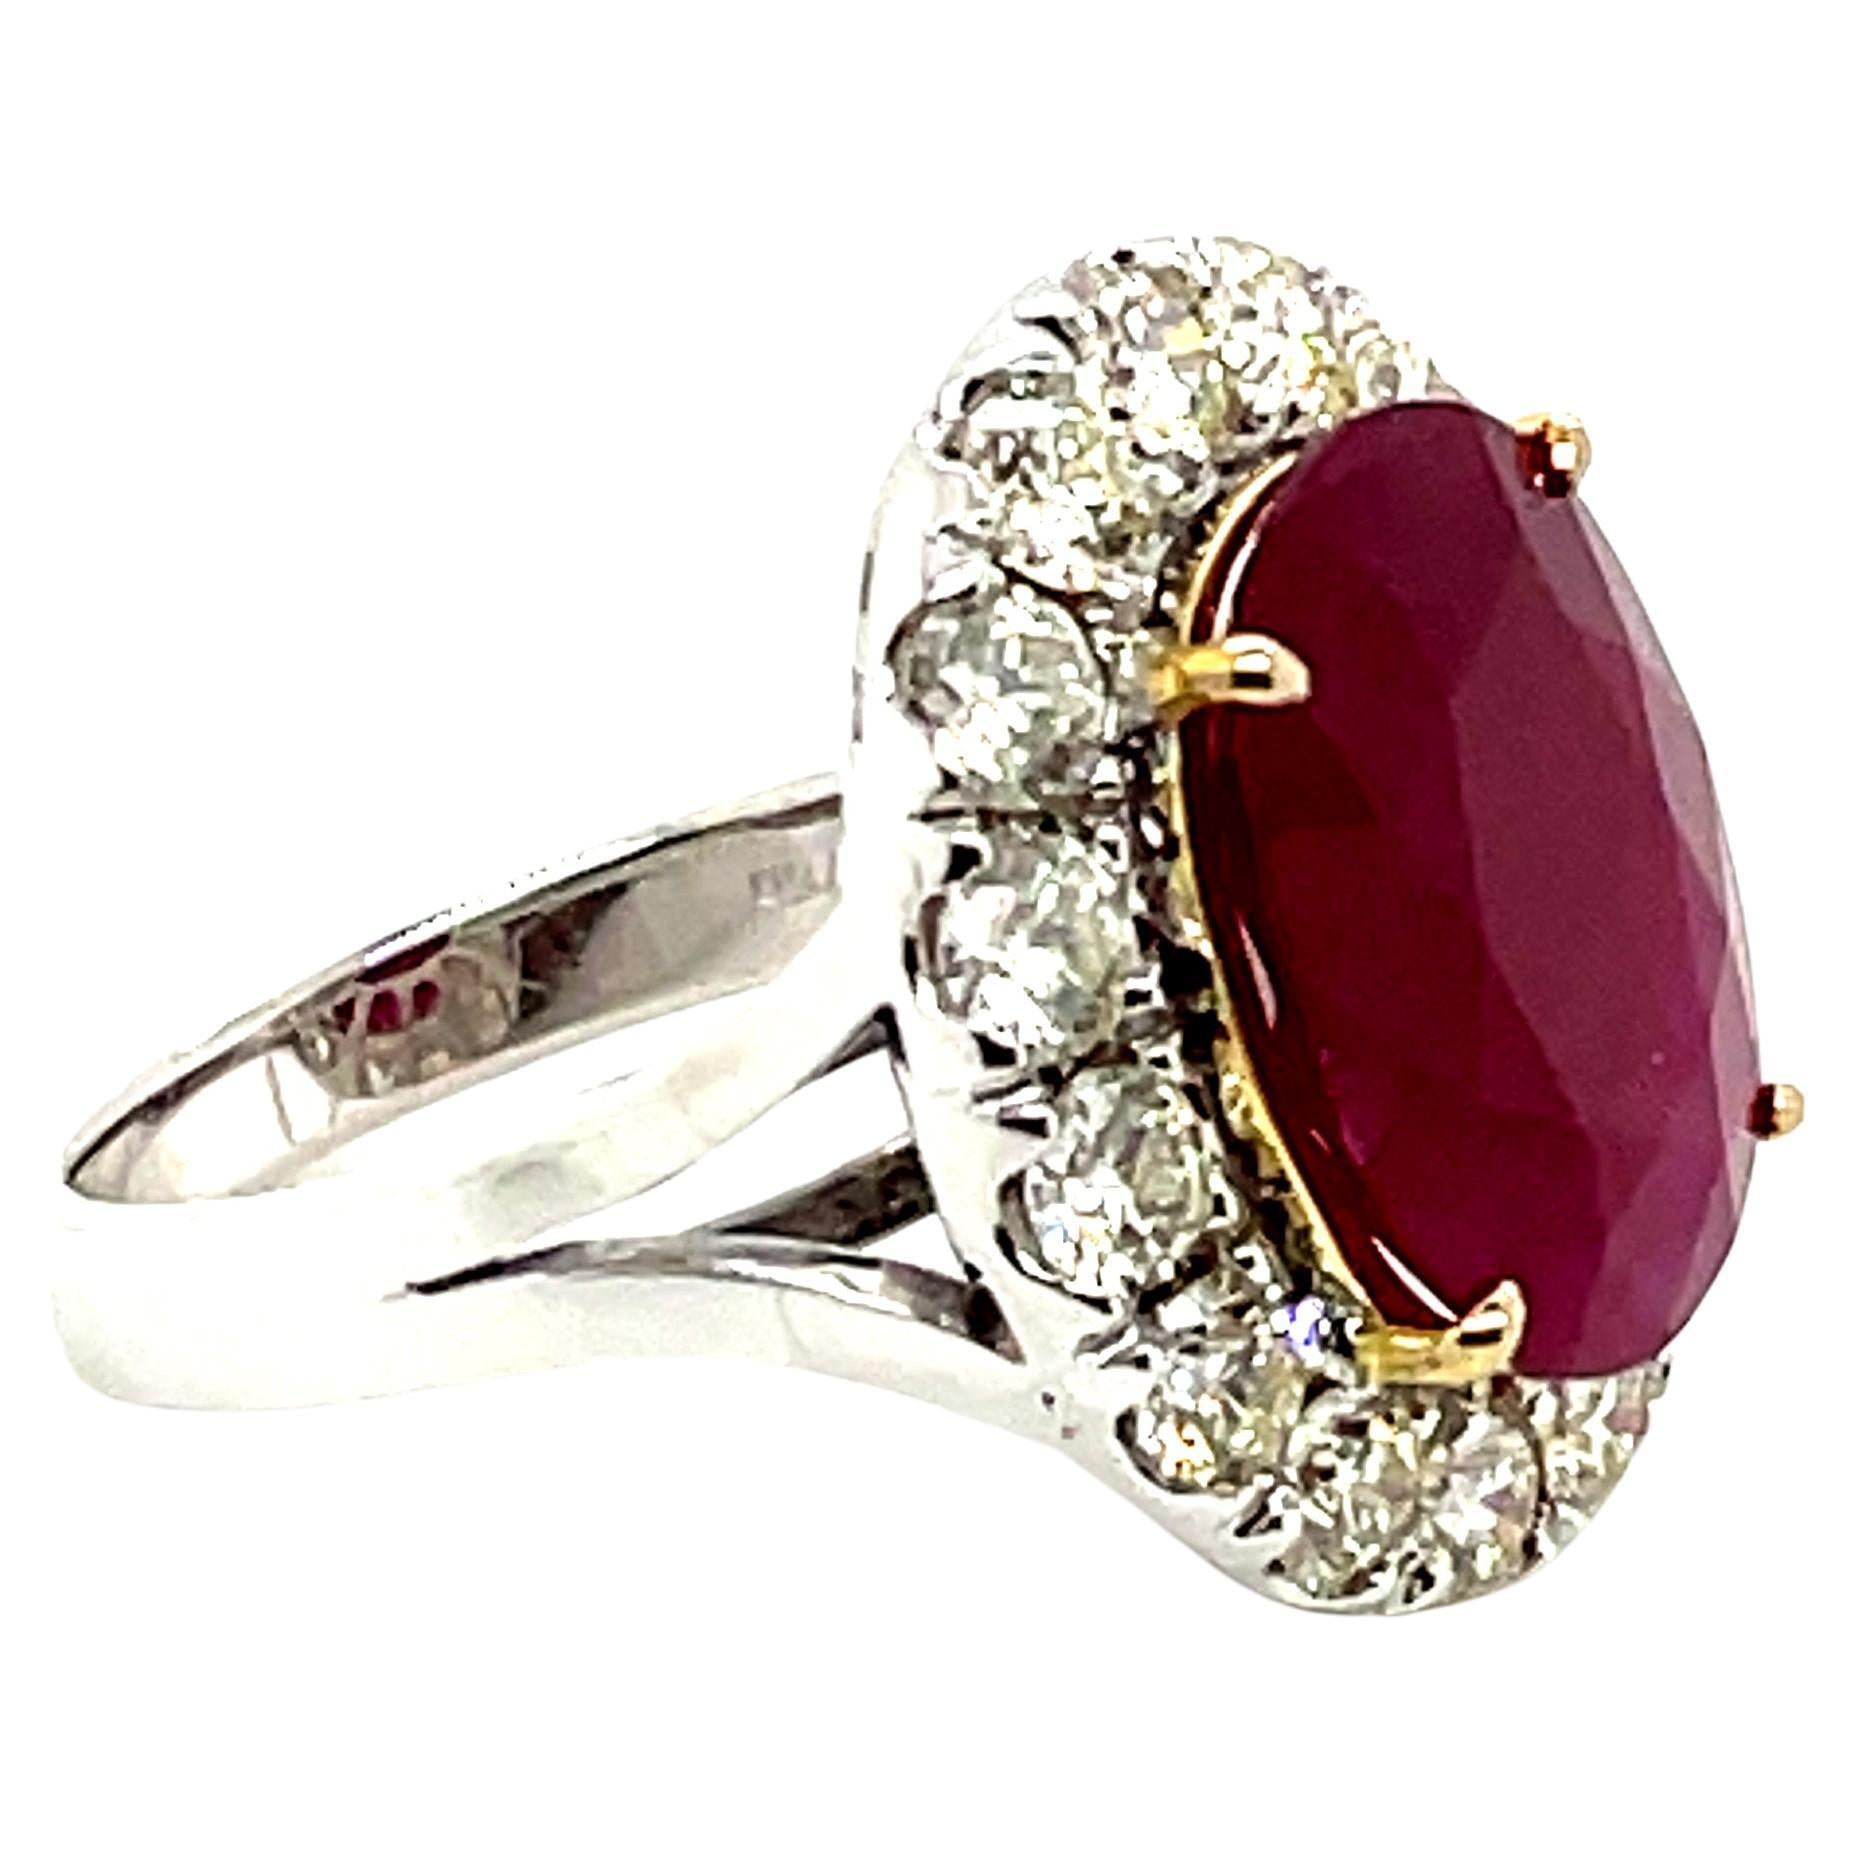 Fit for a queen, the centerpiece boasts an 8.45 cts heated oval ruby sourced from Burma, Myanmar. 

It comes with a GRS certificate, proving its origin and authenticity.

Highlighting its regal beauty, 15 round diamonds (1.92 ct) gracefully encircle